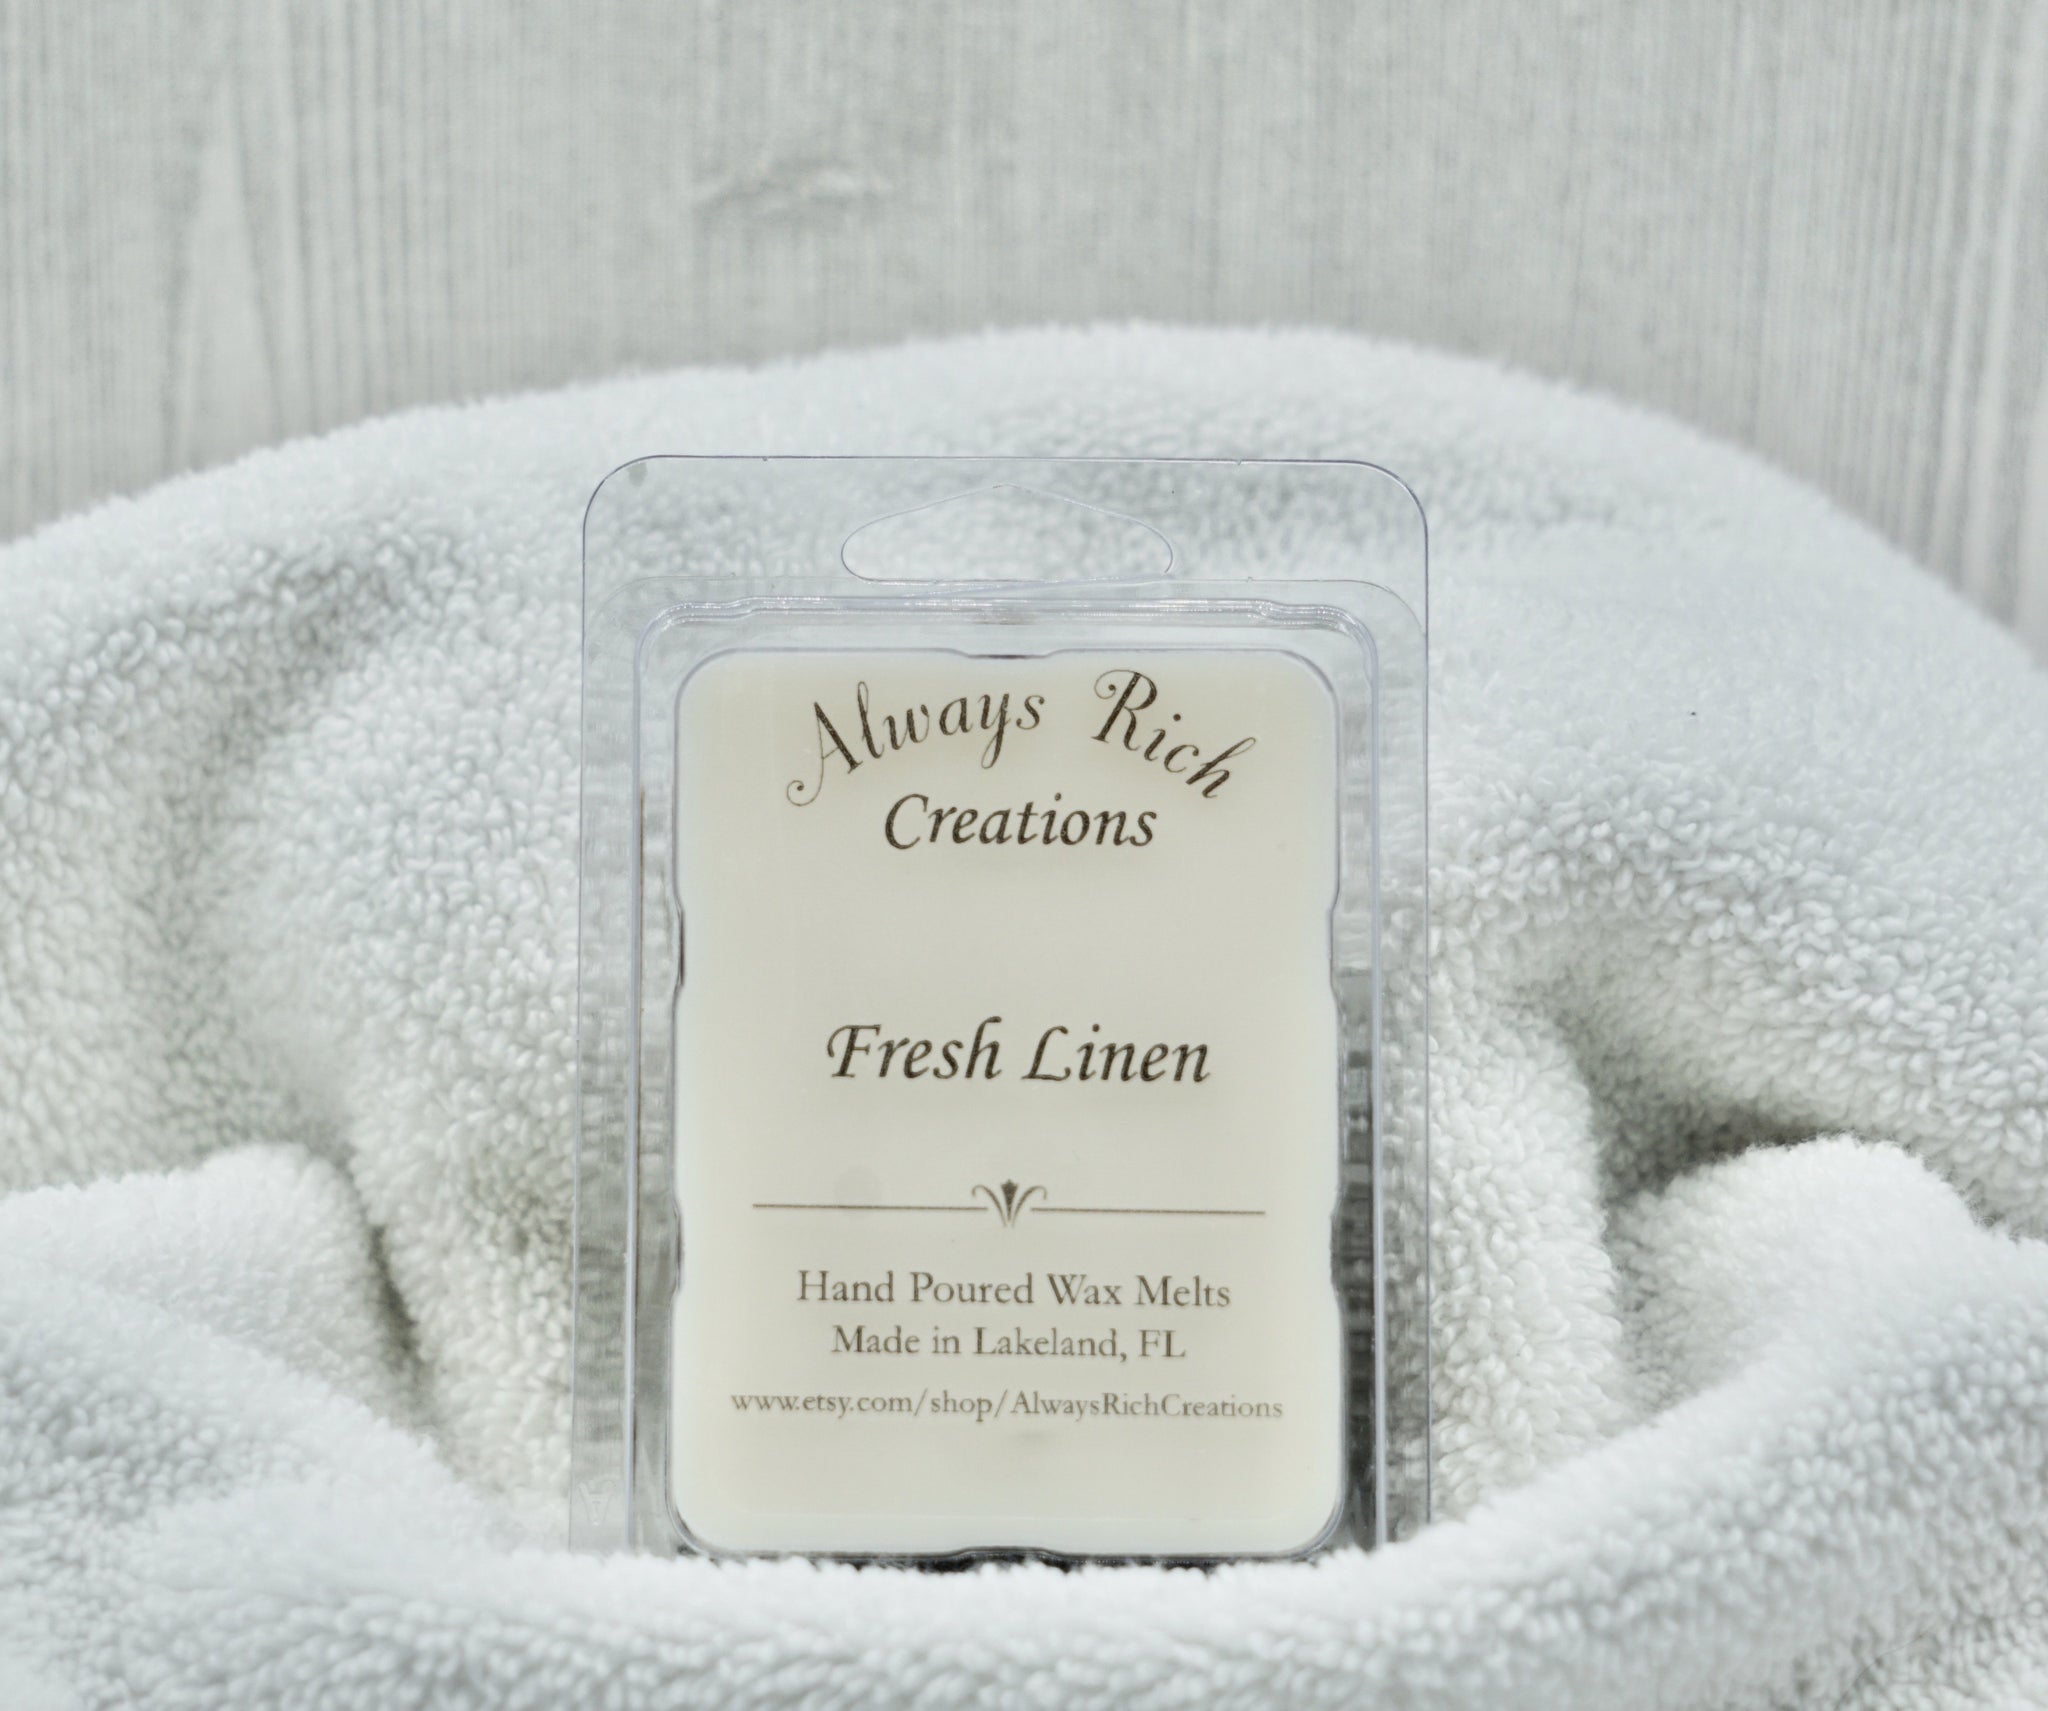 Fresh Linen Collection - Always Rich Creations